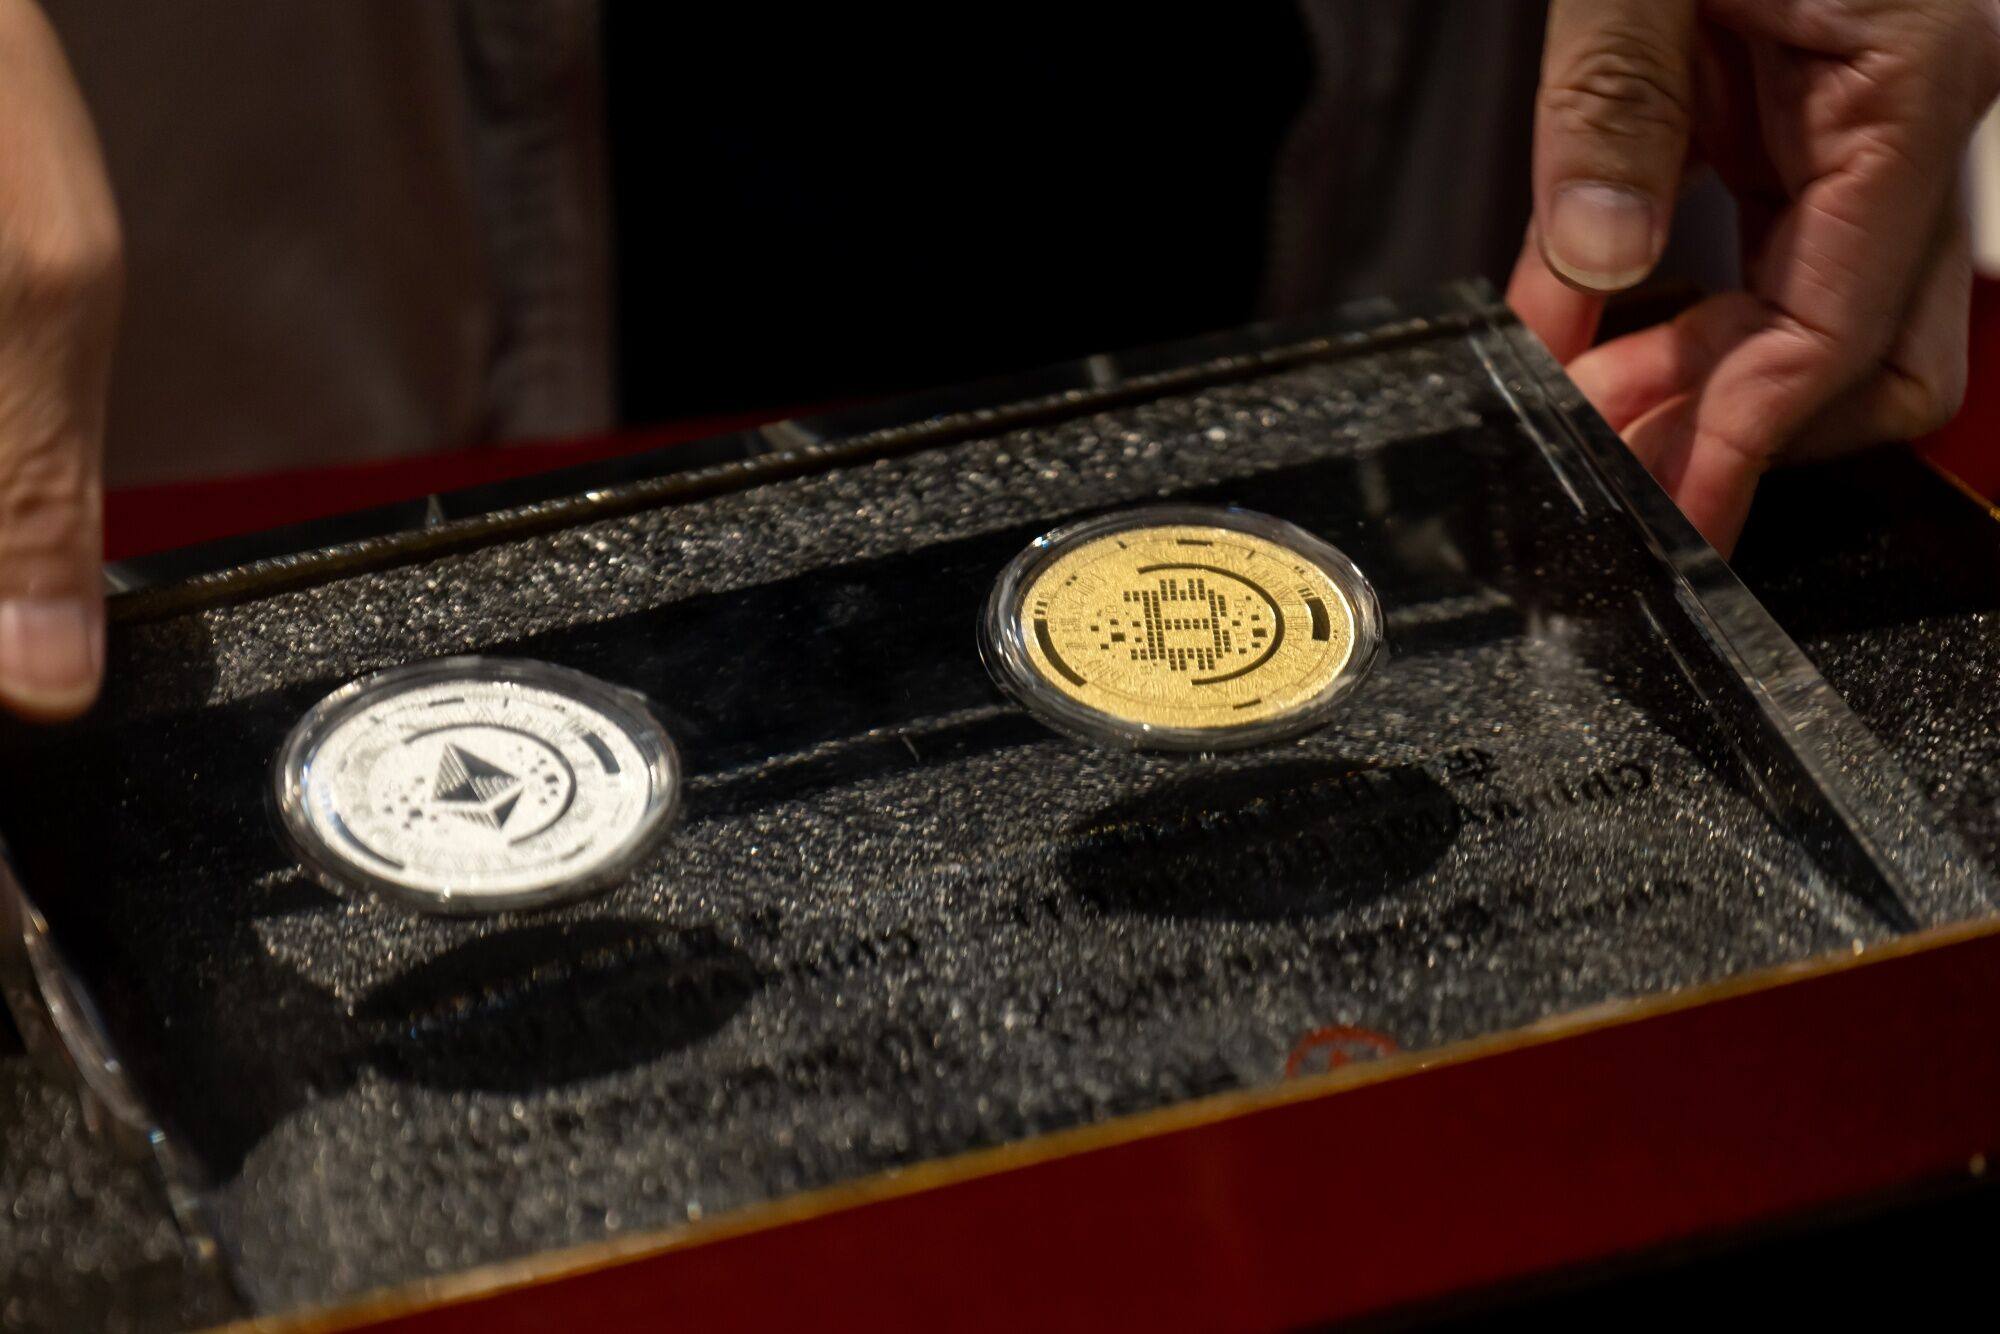 Illustrative bitcoin and ether tokens. Photo: Bloomberg